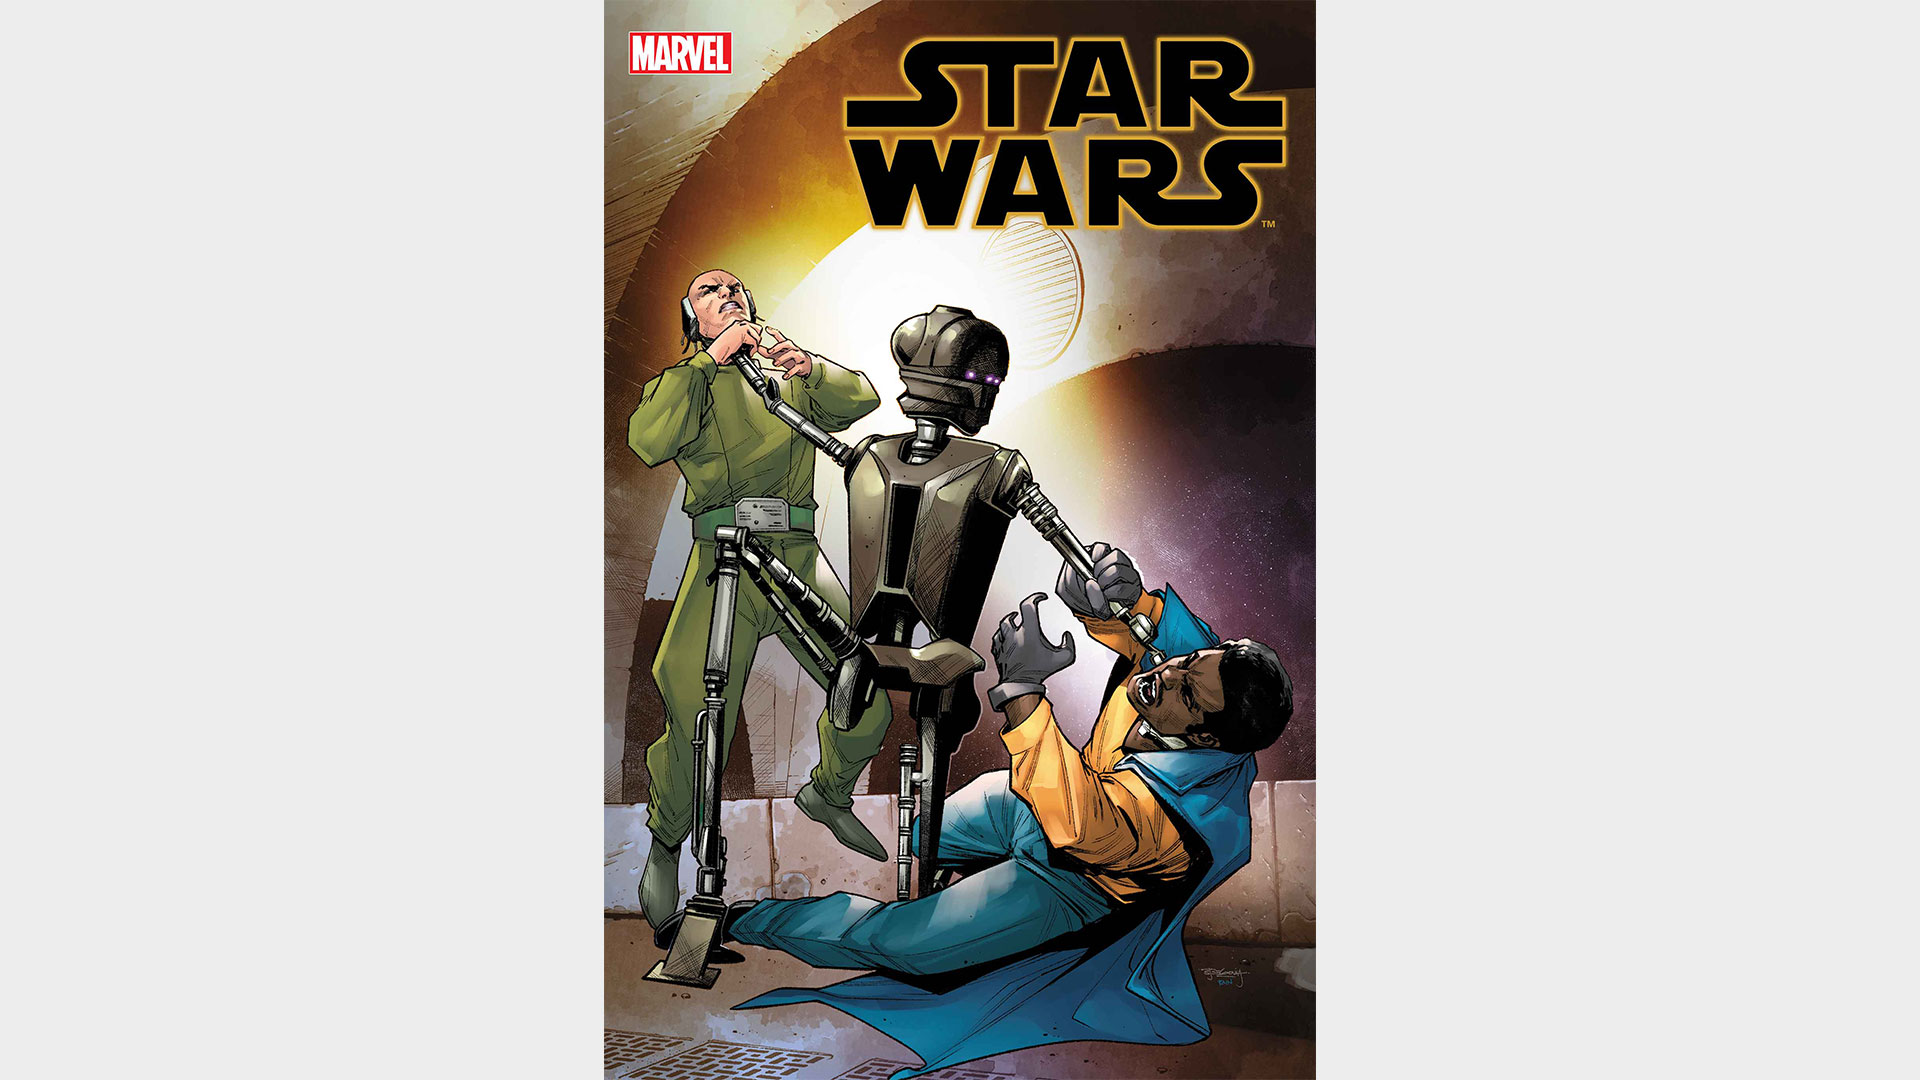 Star Wars #38 cover